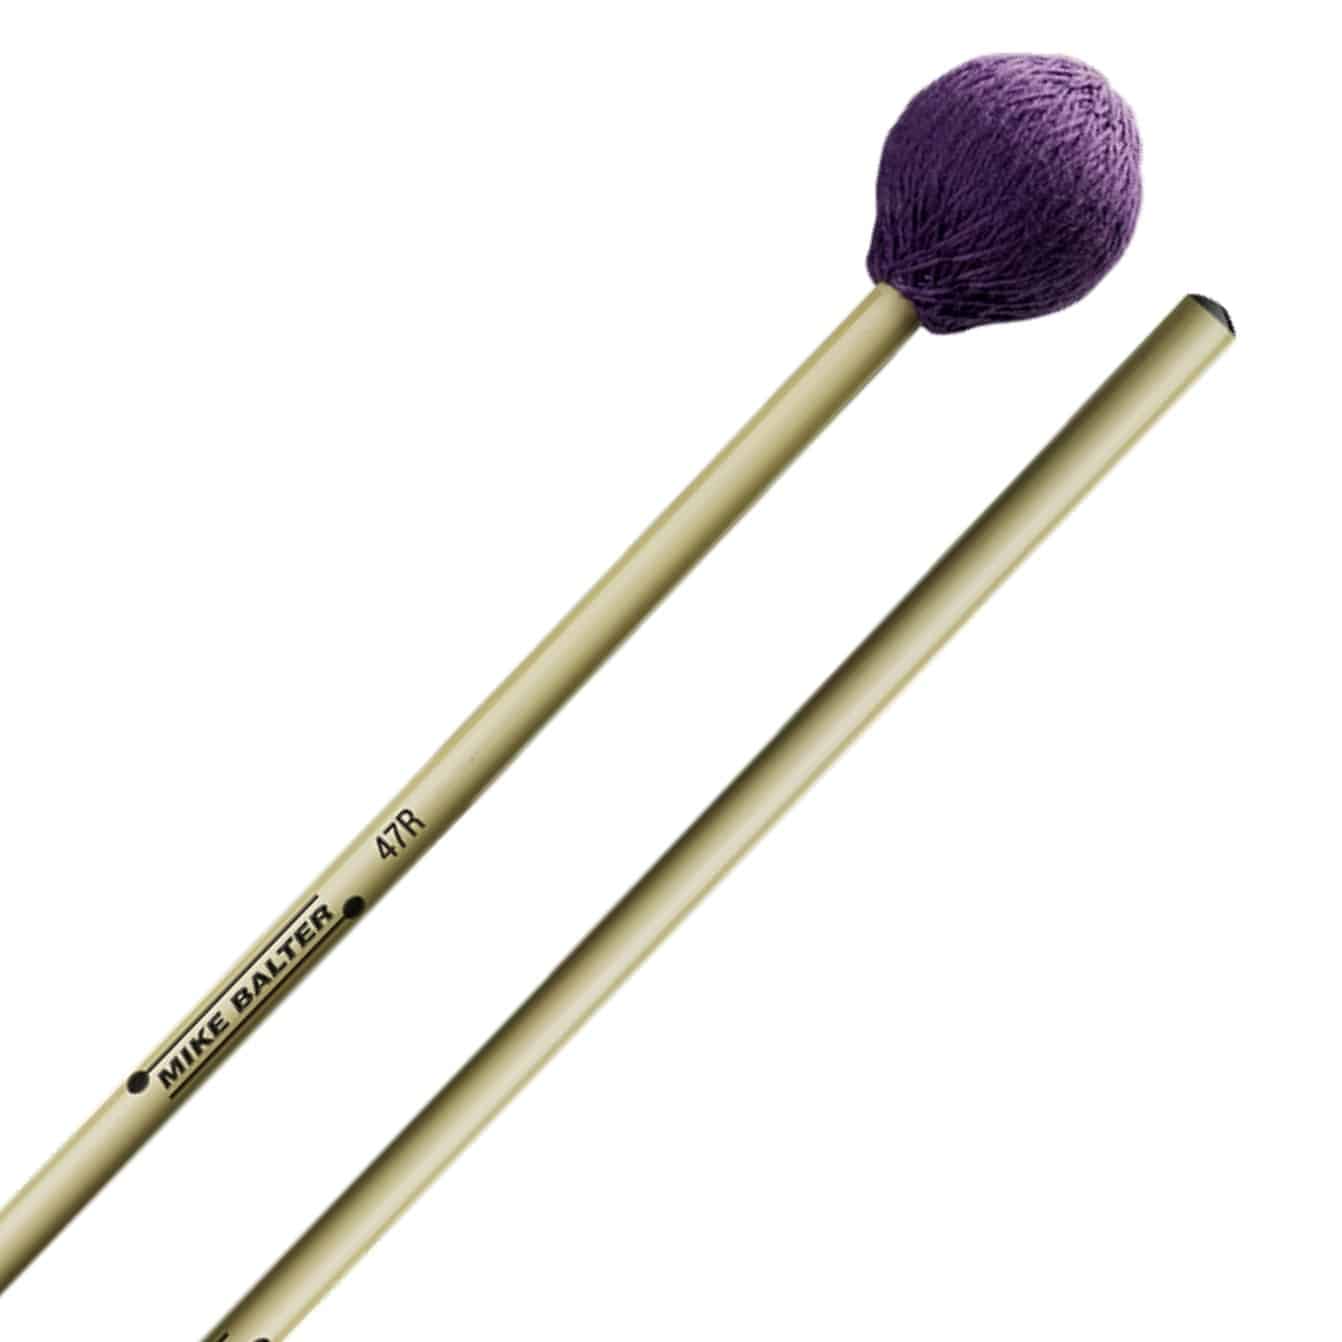 Balter 47 Expression Series Articulate Vibraphone Mallets